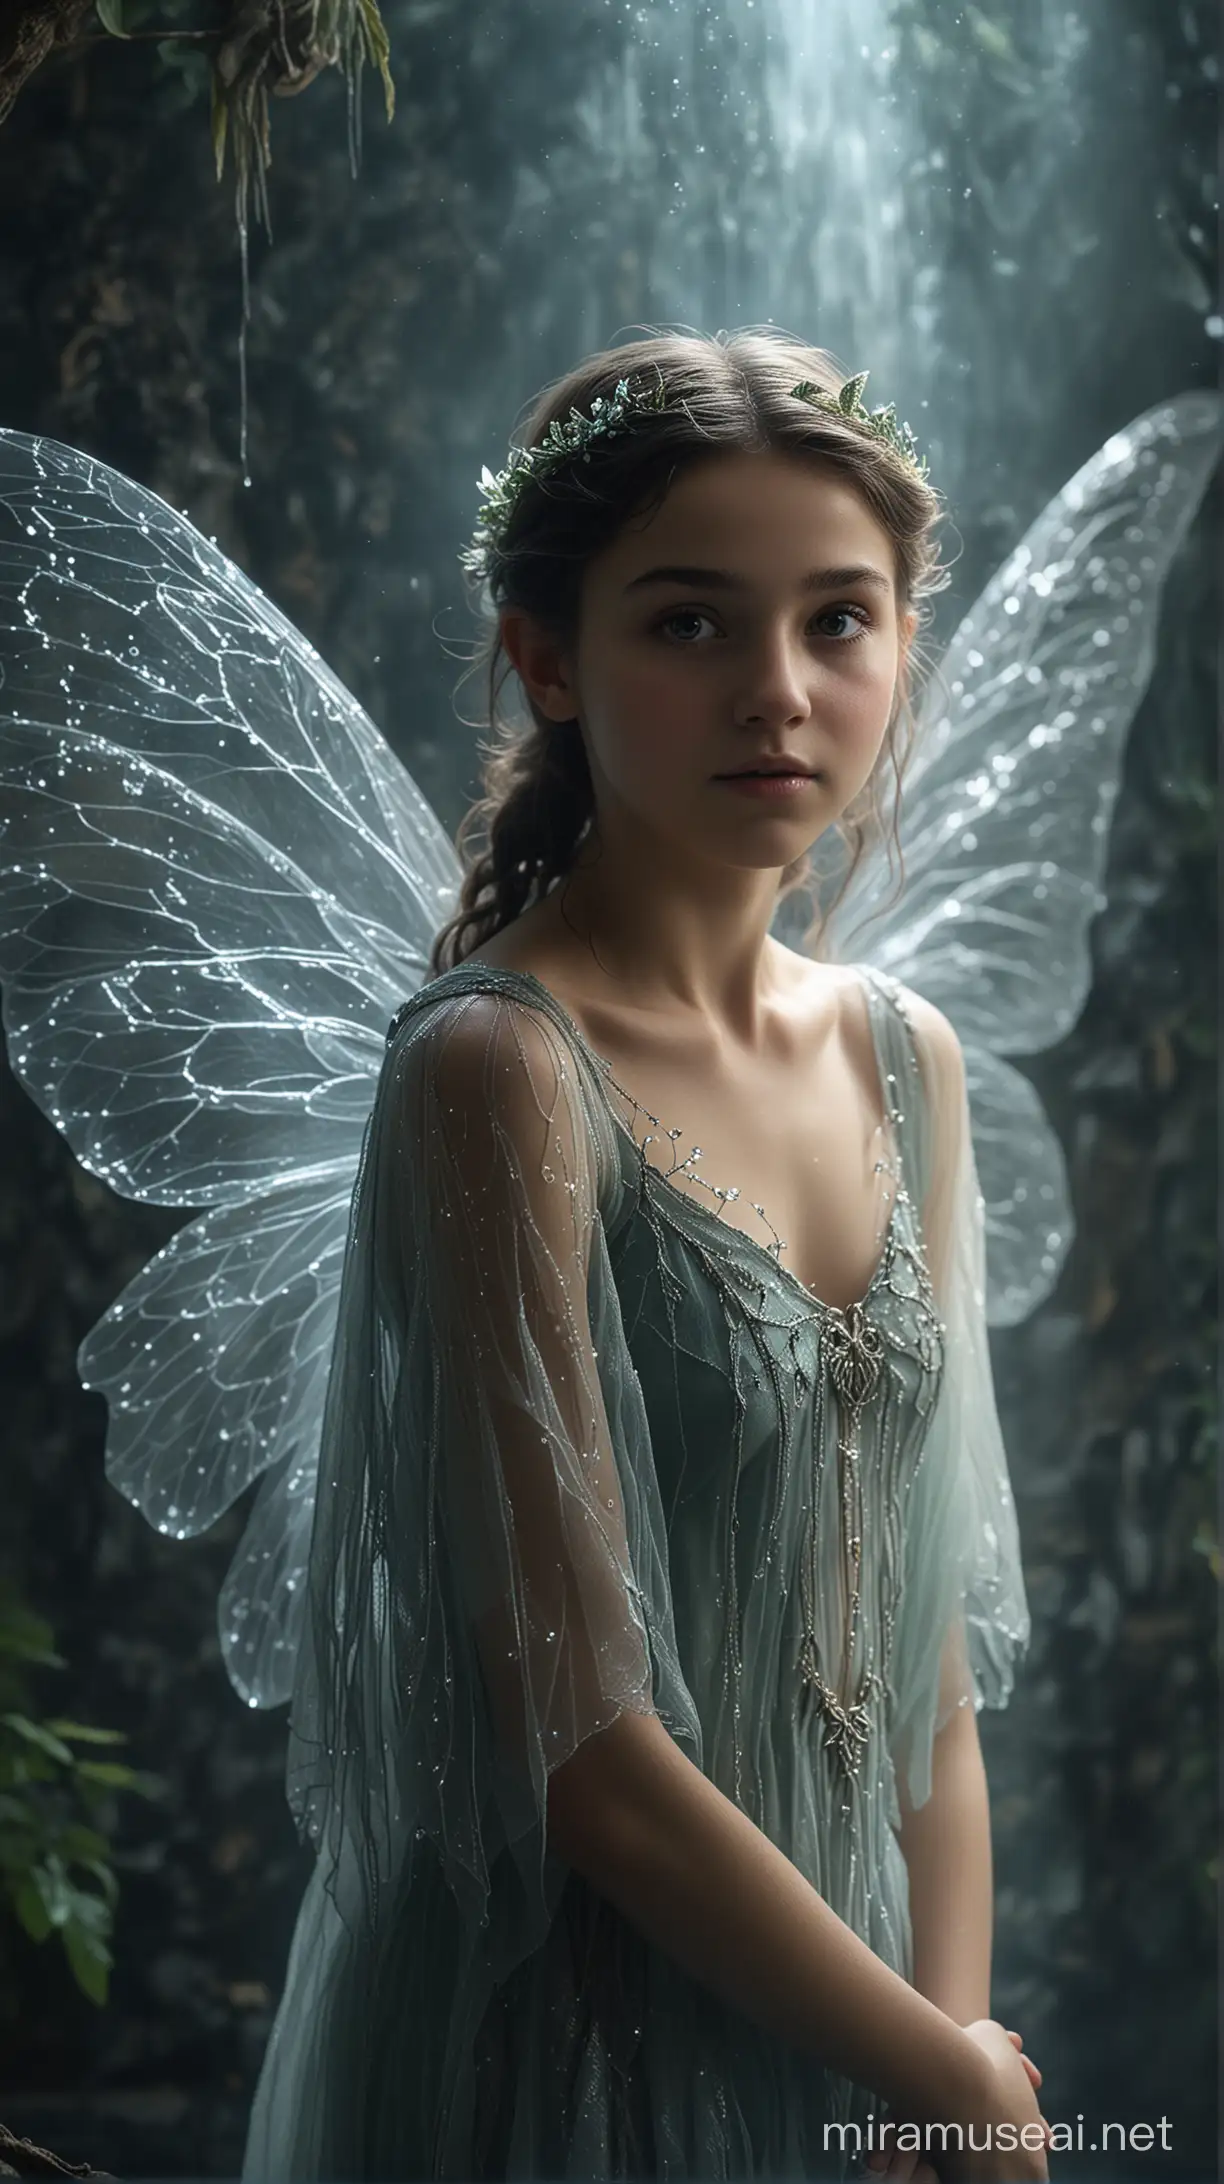 Photorealistic portrait shot of a 13-year old female fairy. Subject has real fairy wings. Subject has a kind expression. Subject is in an enchanted grotto. Mist, fog, glowing light. High definition, raw style.